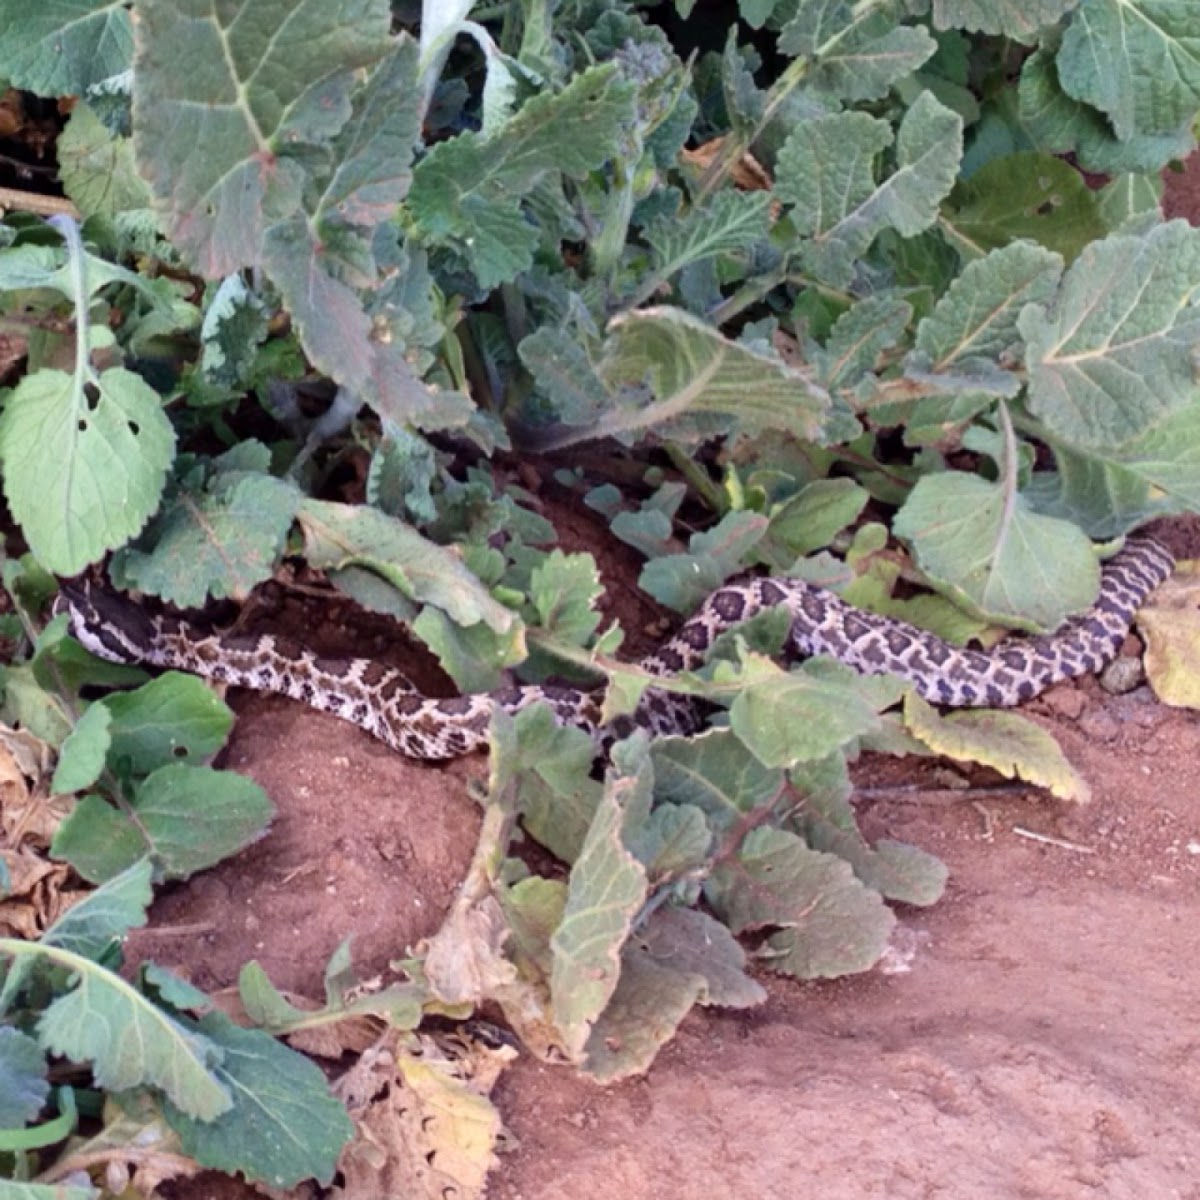 Southern Pacific rattlesnake